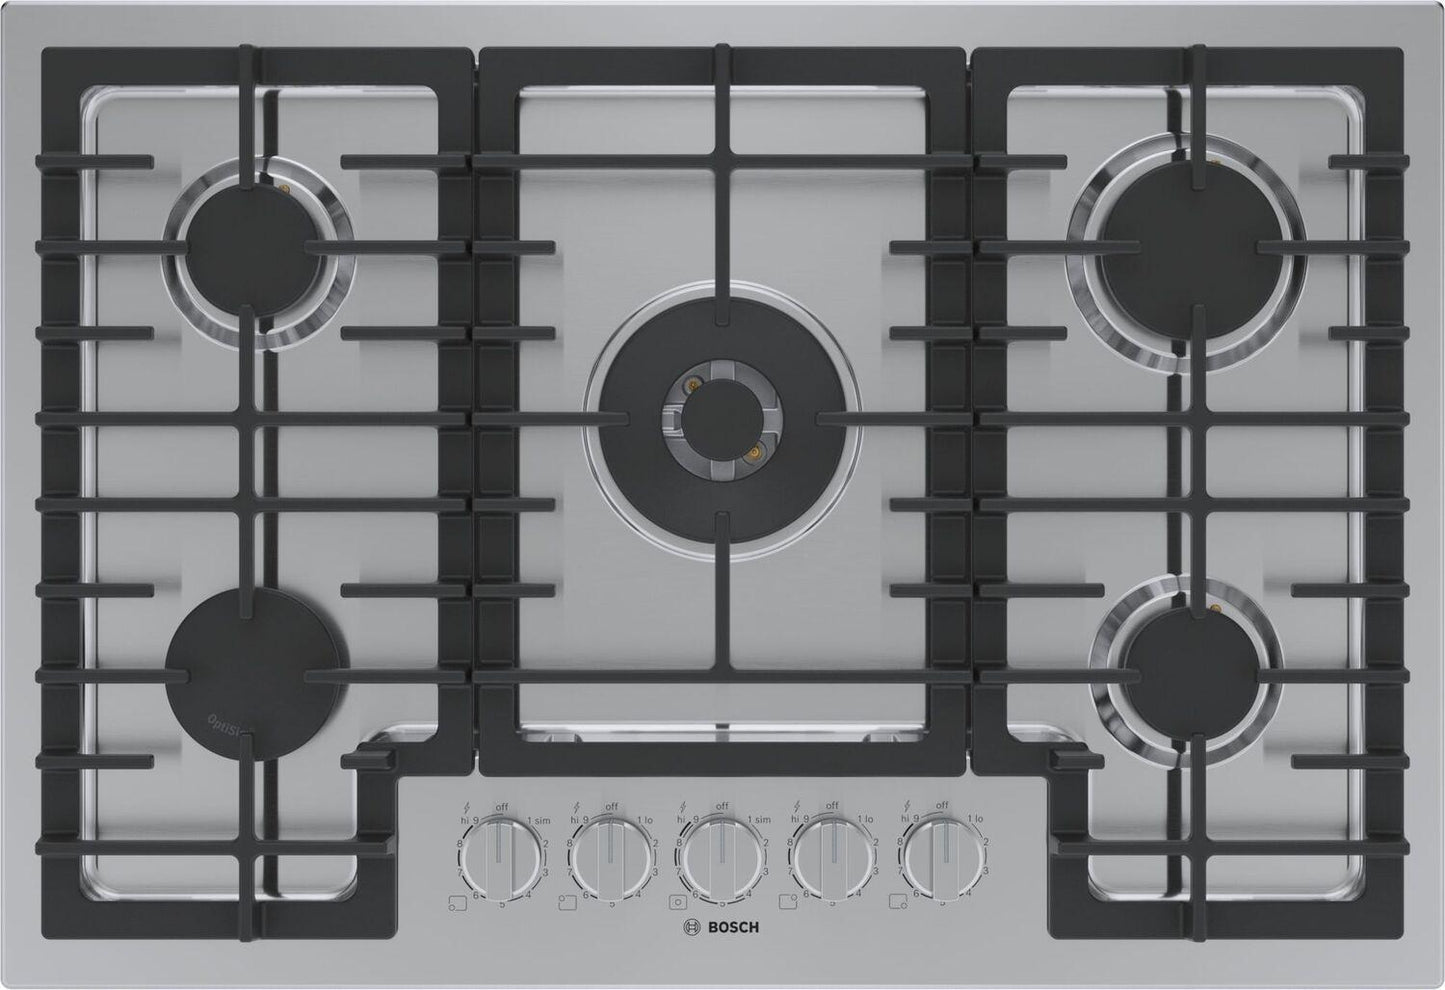 Bosch NGM8059UC 800 Series Gas Cooktop 30" Stainless Steel Ngm8059Uc